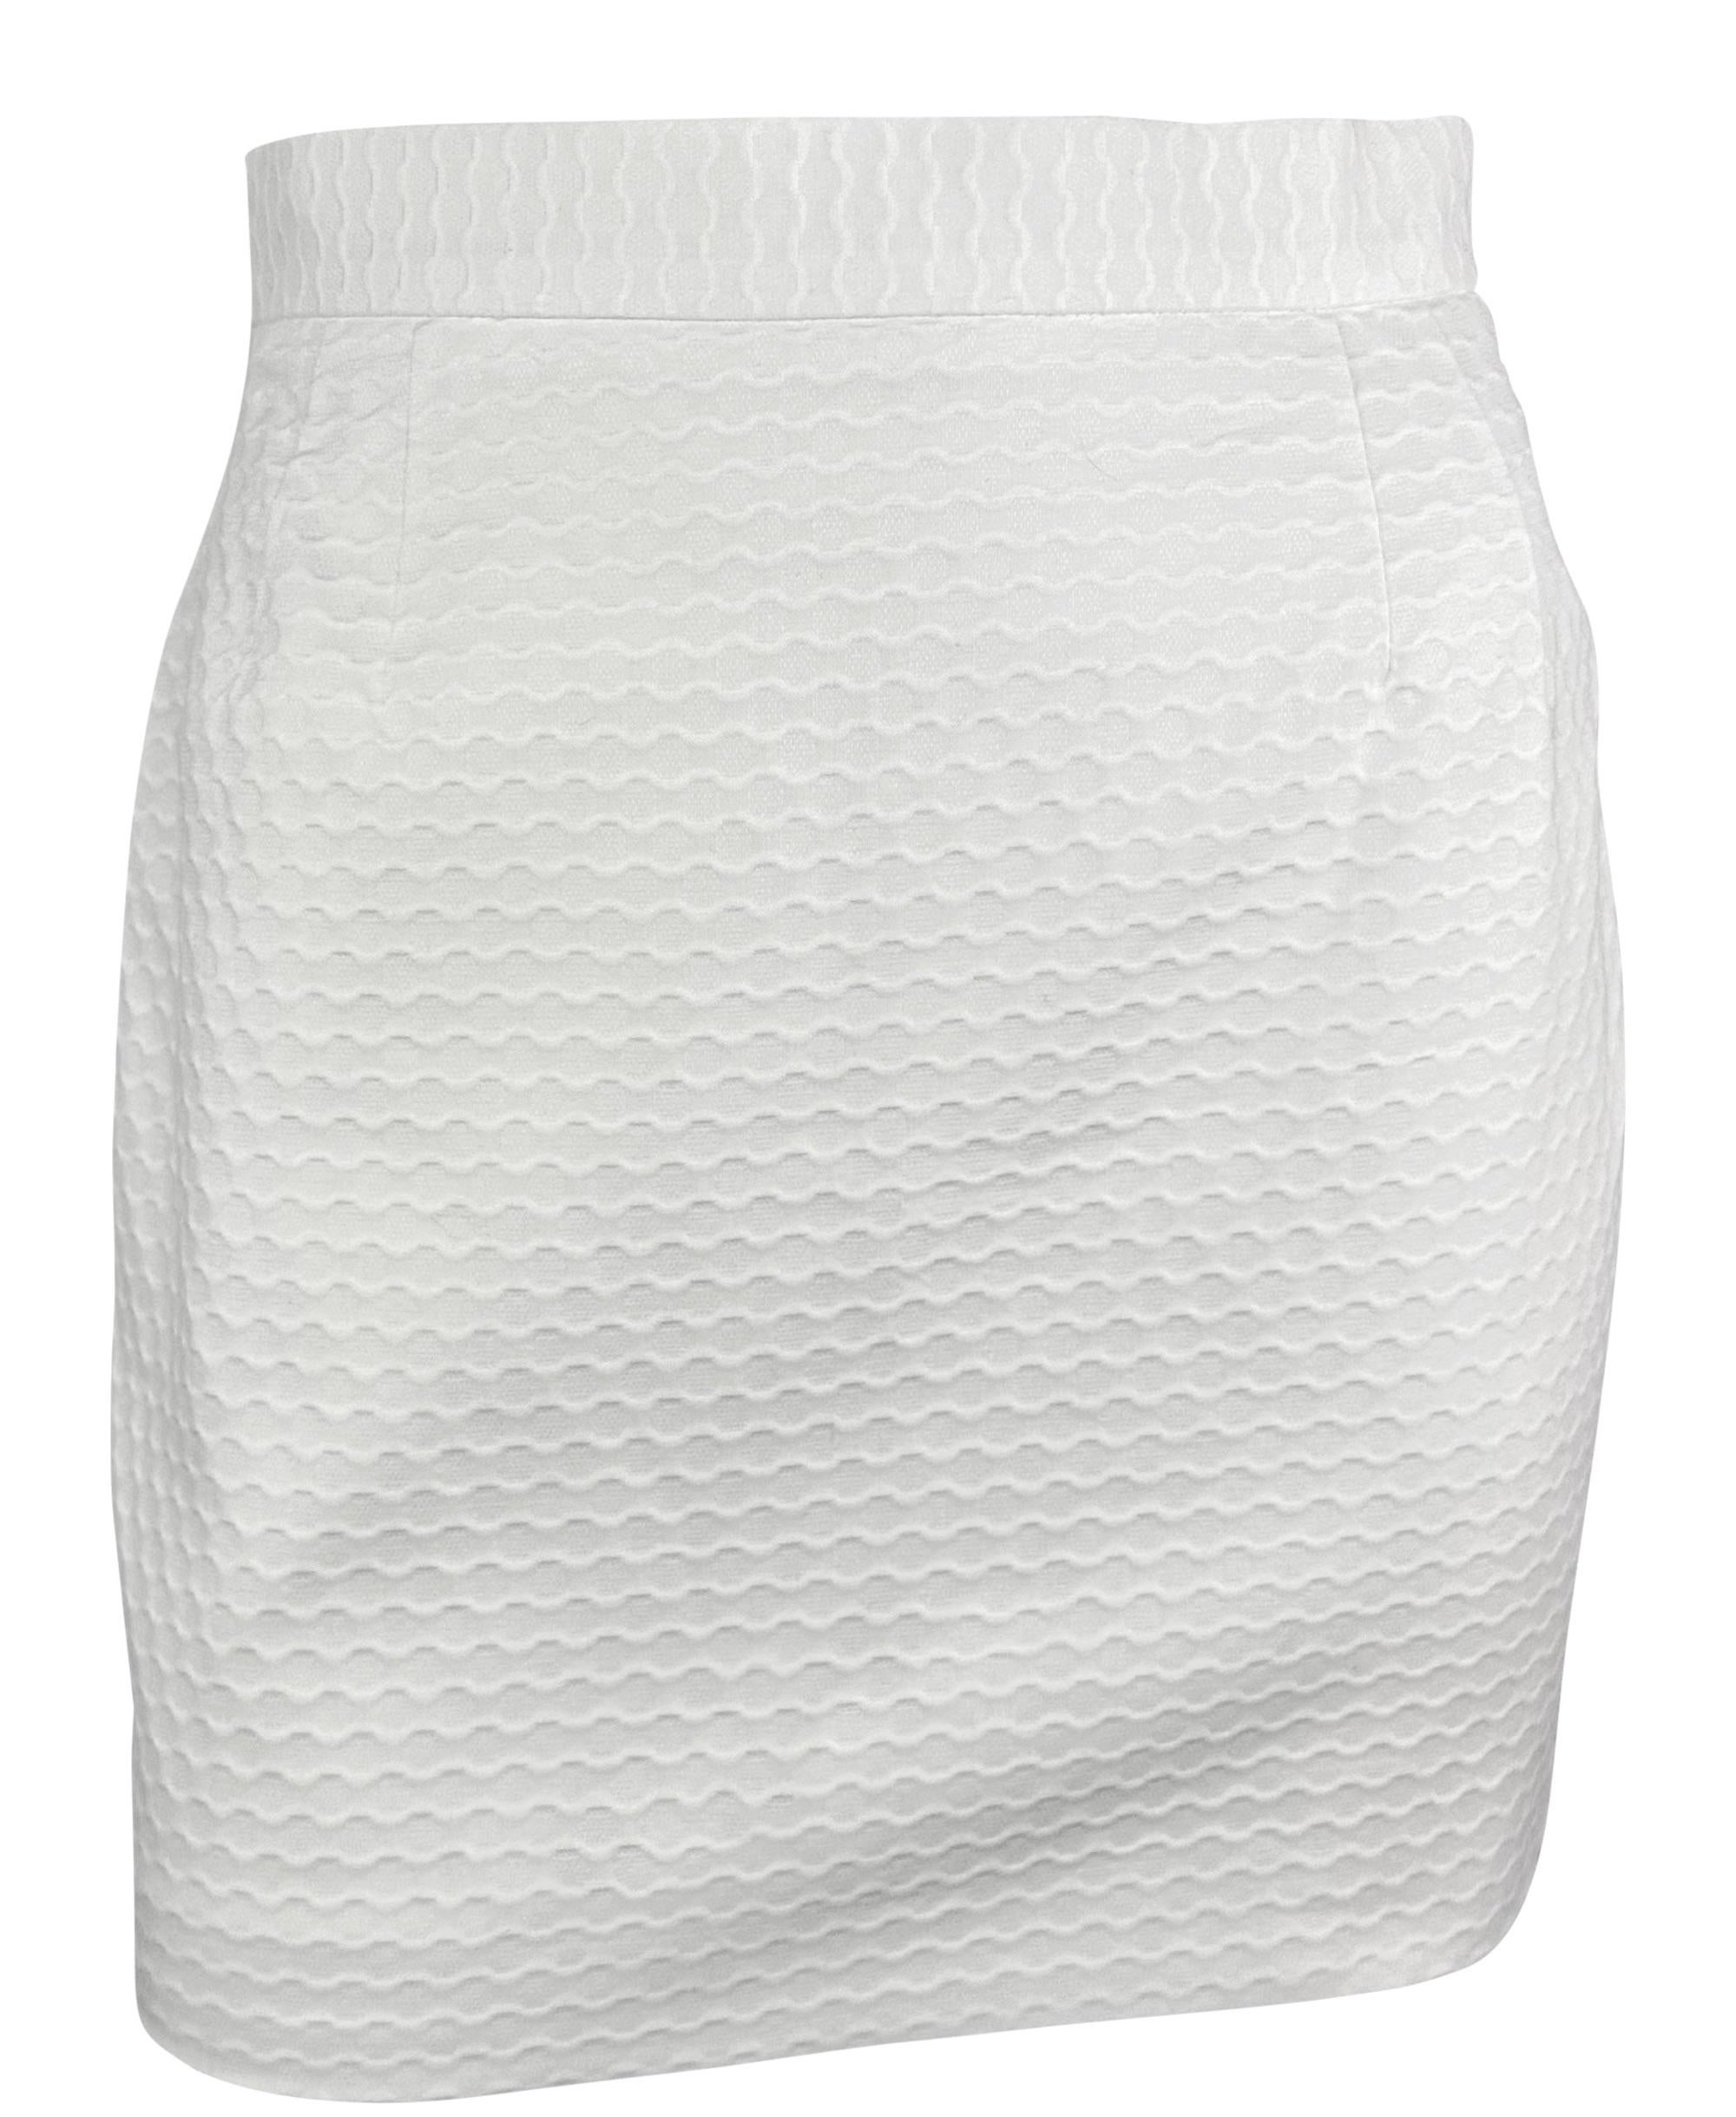 S/S 1995 Dolce & Gabbana Belted White Waffle Knit Mini Skirt Suit For Sale 4